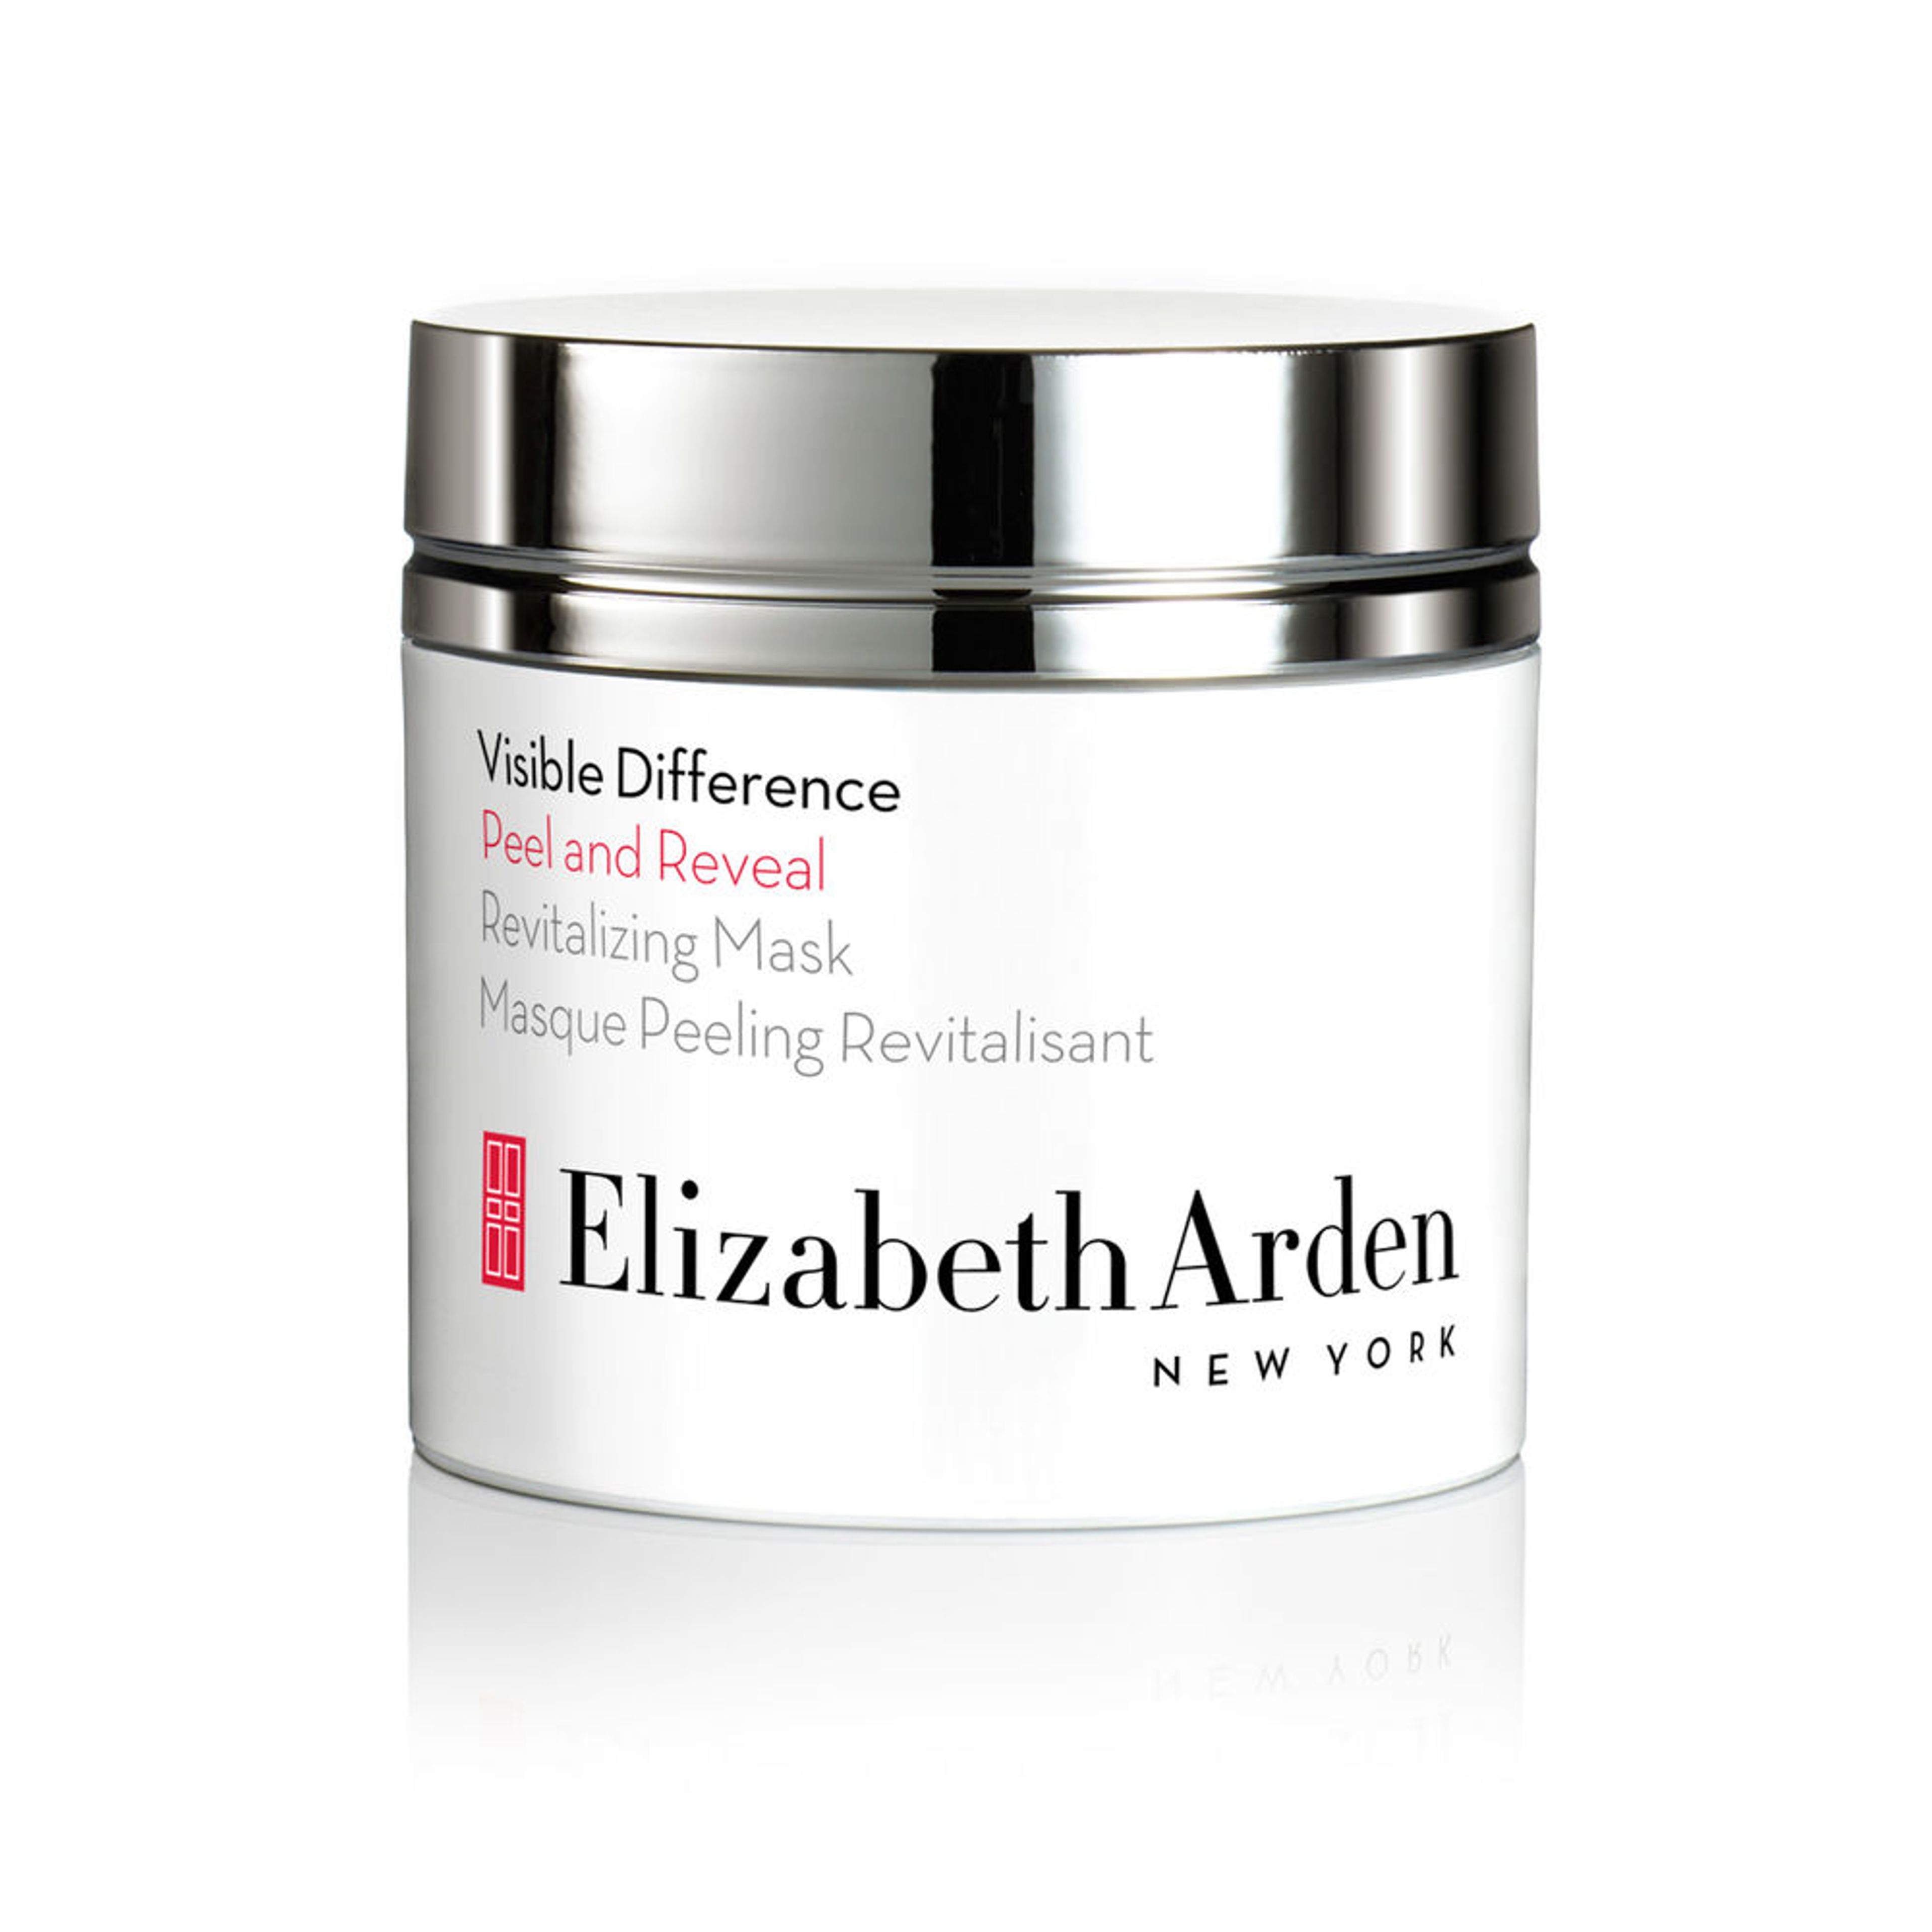 Elizabeth Arden Visible Difference Peel And Reveal Revitalizing Mask 1